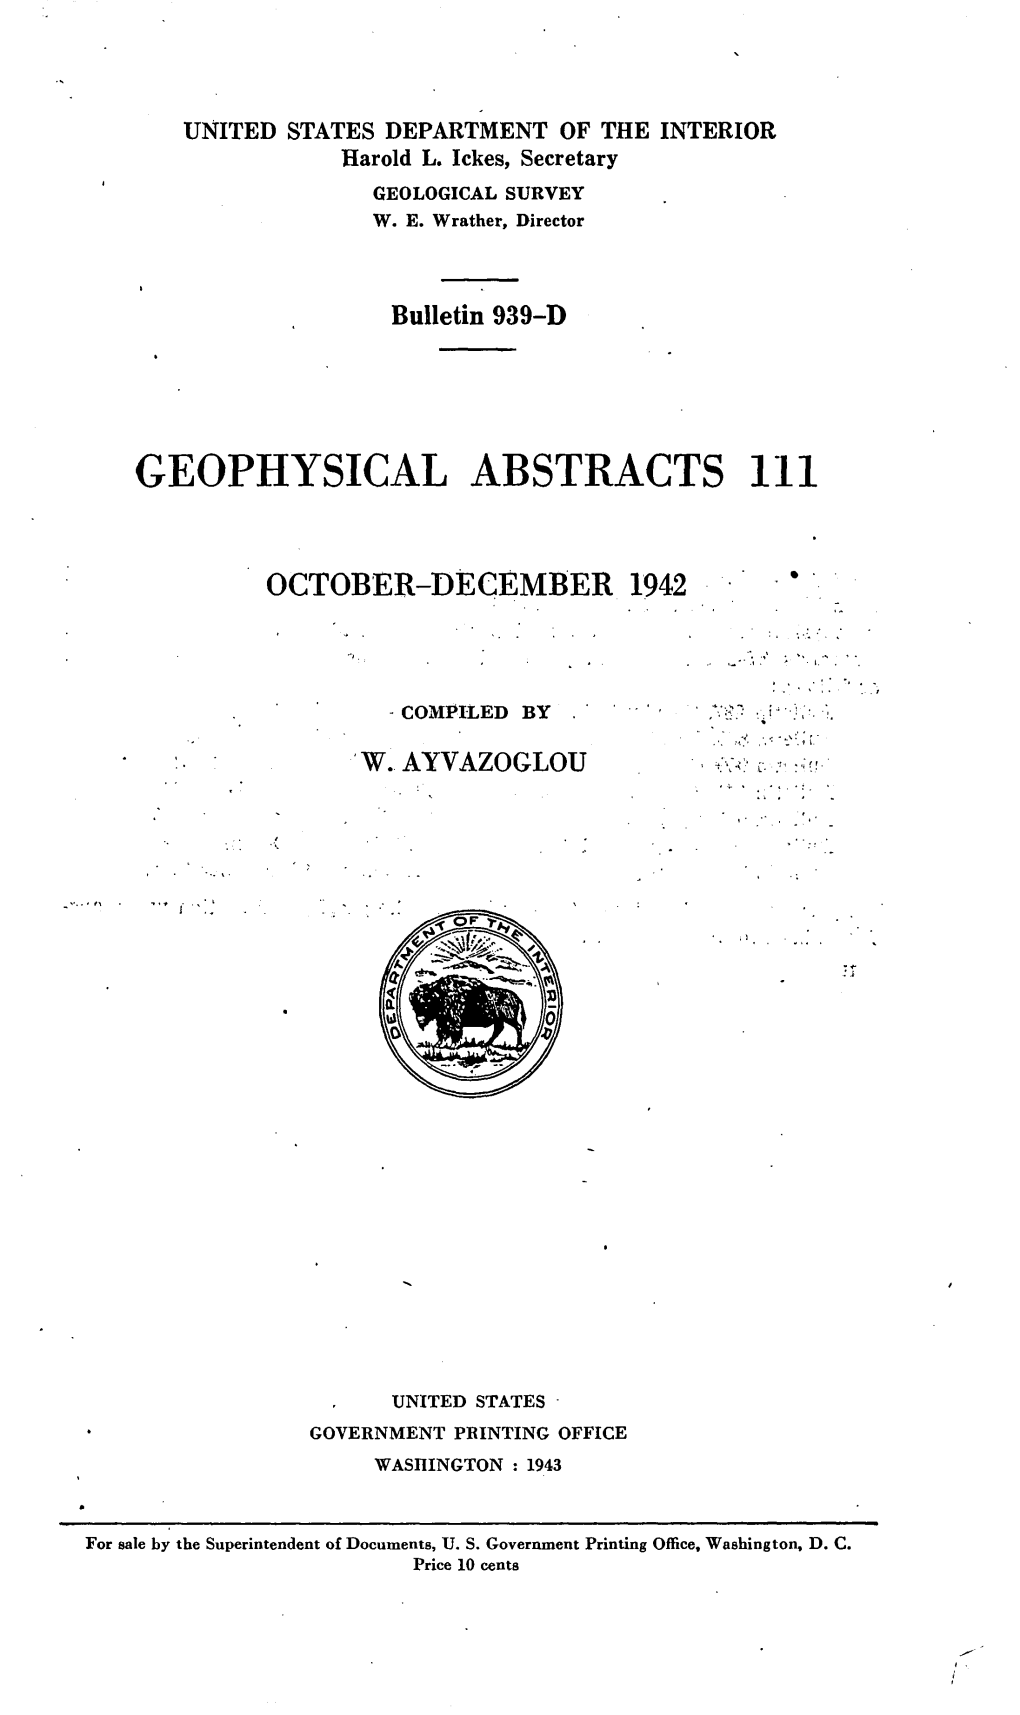 Geophysical Abstracts 111